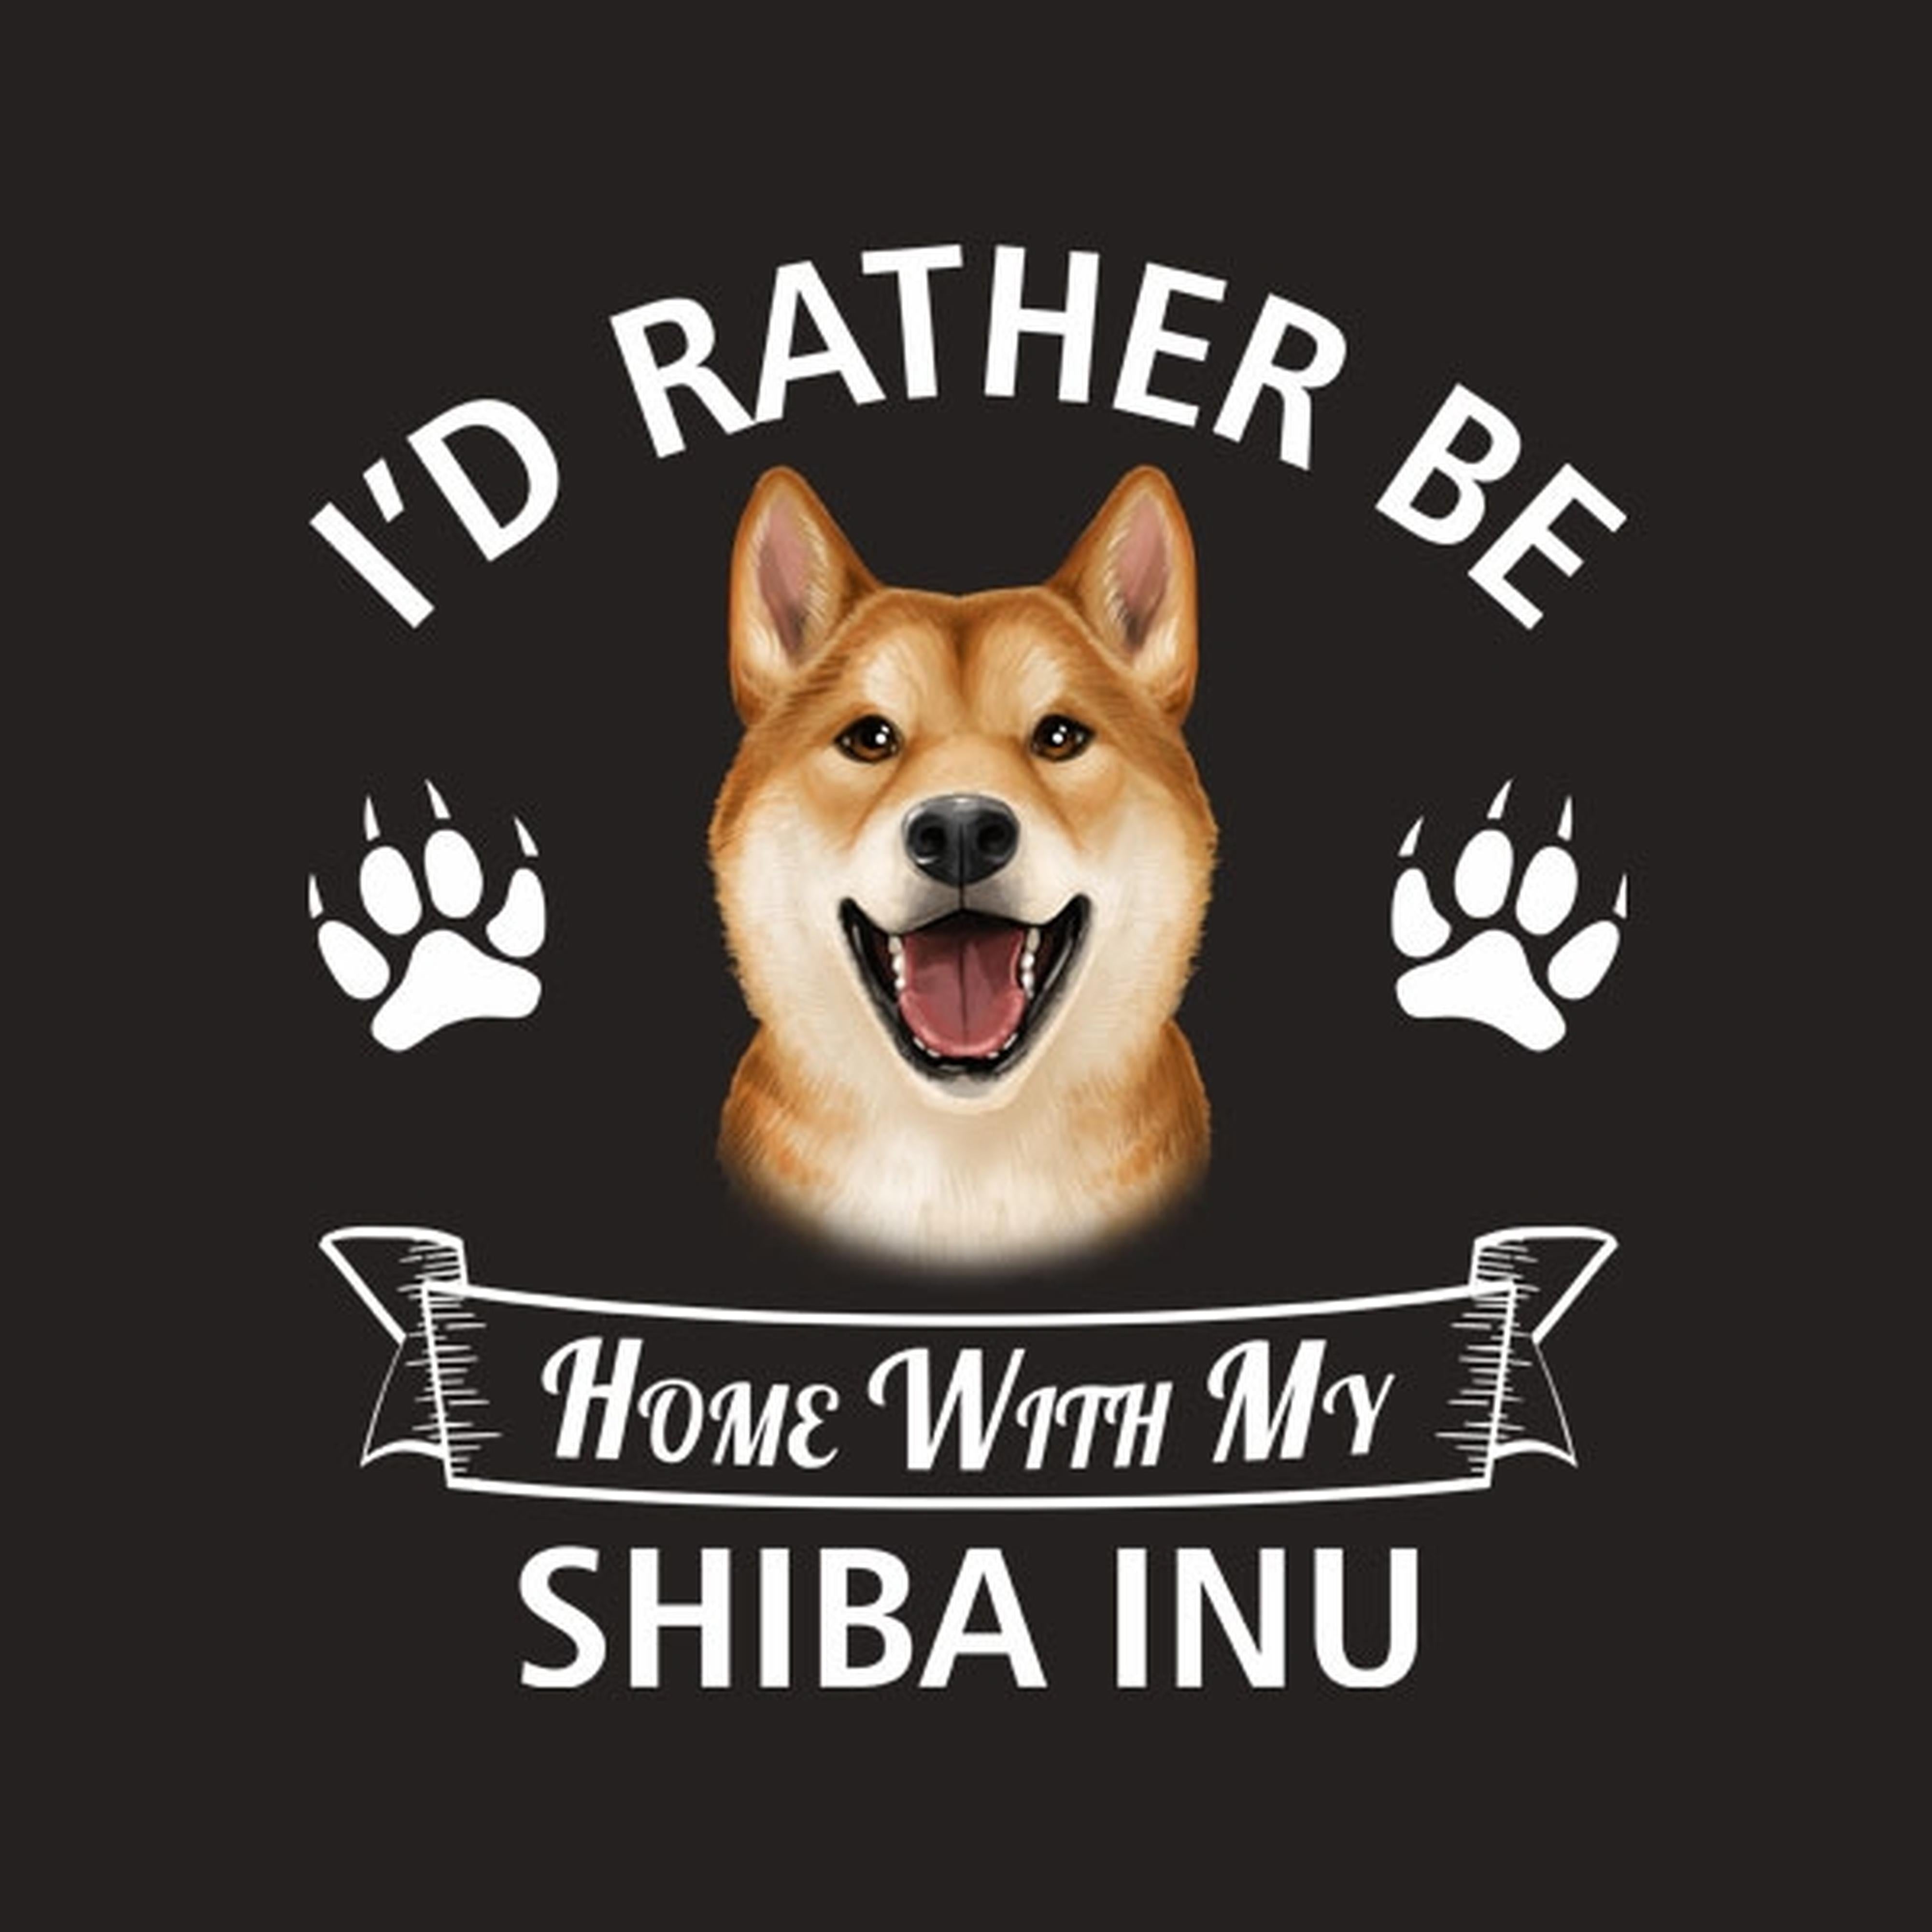 I'd rather stay home with my Shiba Inu - T-shirt